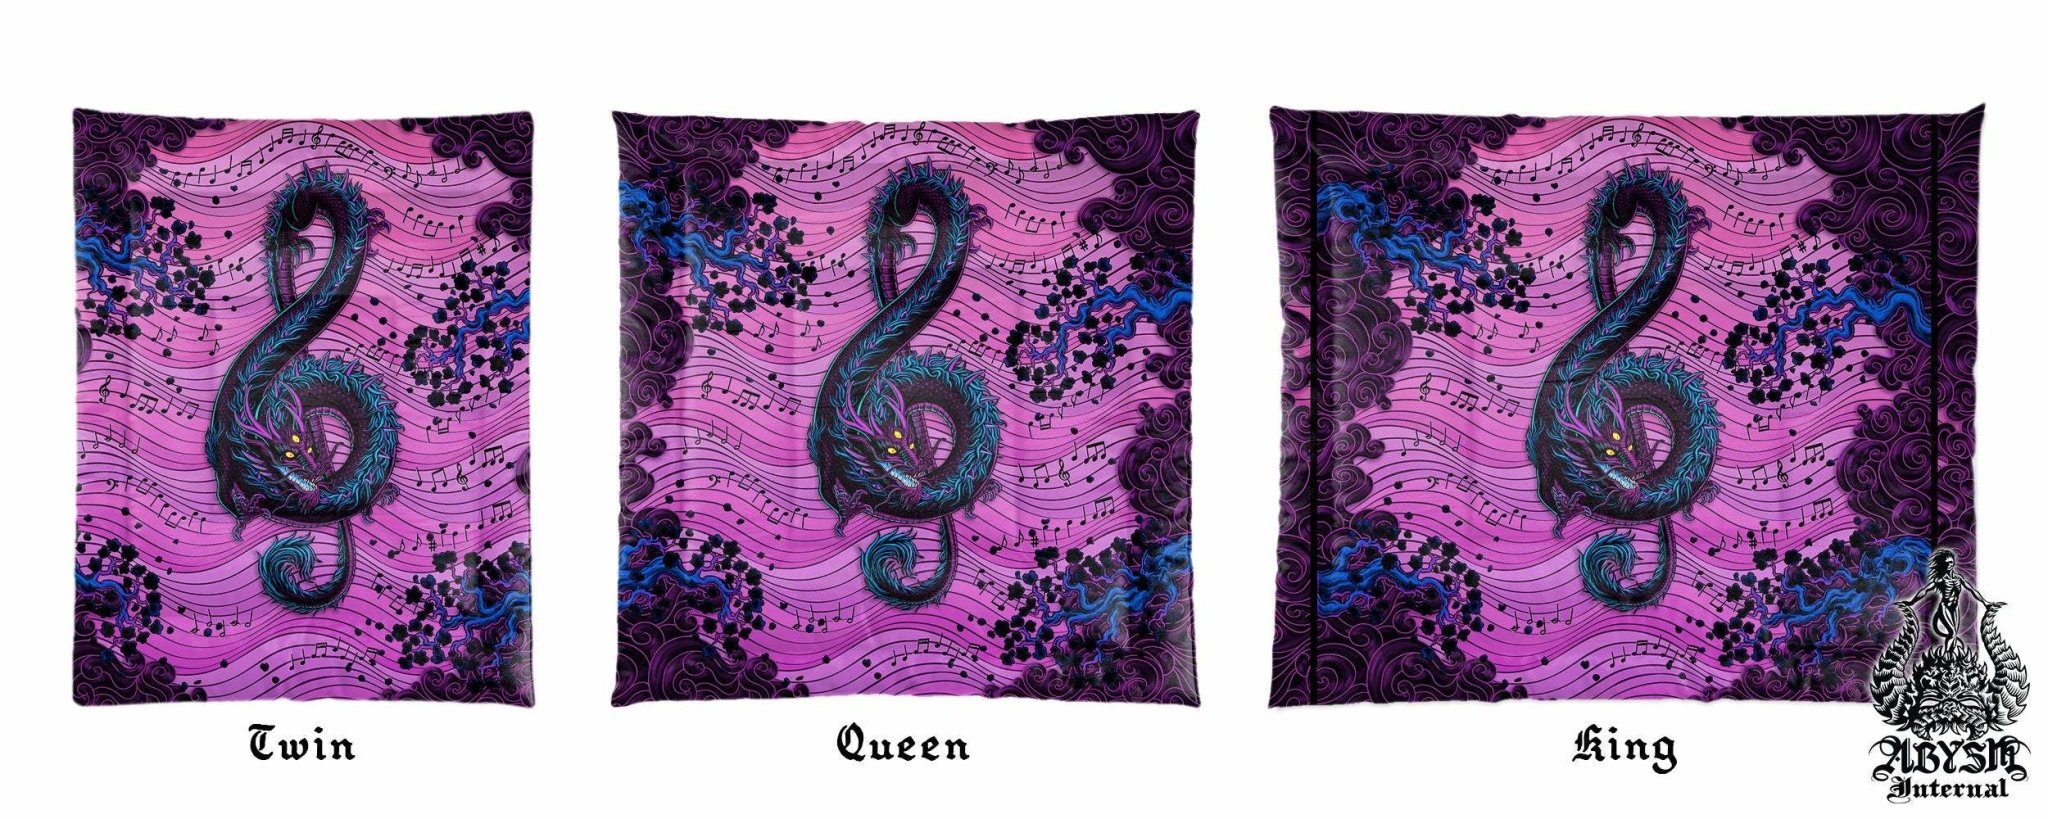 Pastel Goth Dragon Bedding Set, Comforter and Duvet, Music Bed Cover and Bedroom Decor, King, Queen and Twin Size - Black and Purple - Abysm Internal